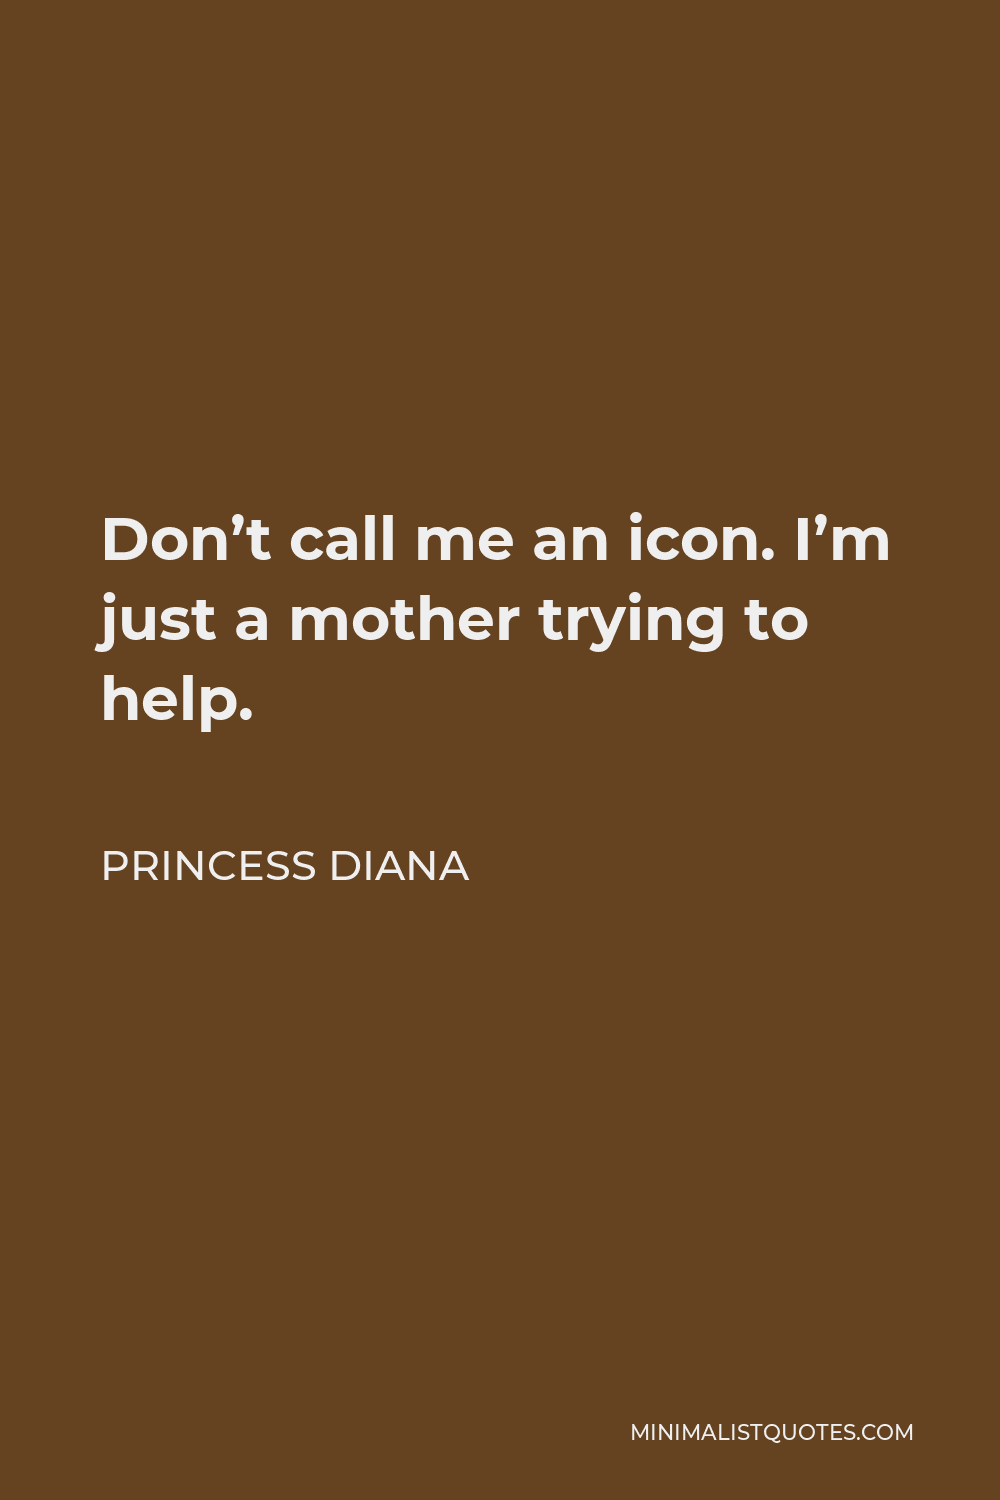 Princess Diana Quote - Don’t call me an icon. I’m just a mother trying to help.